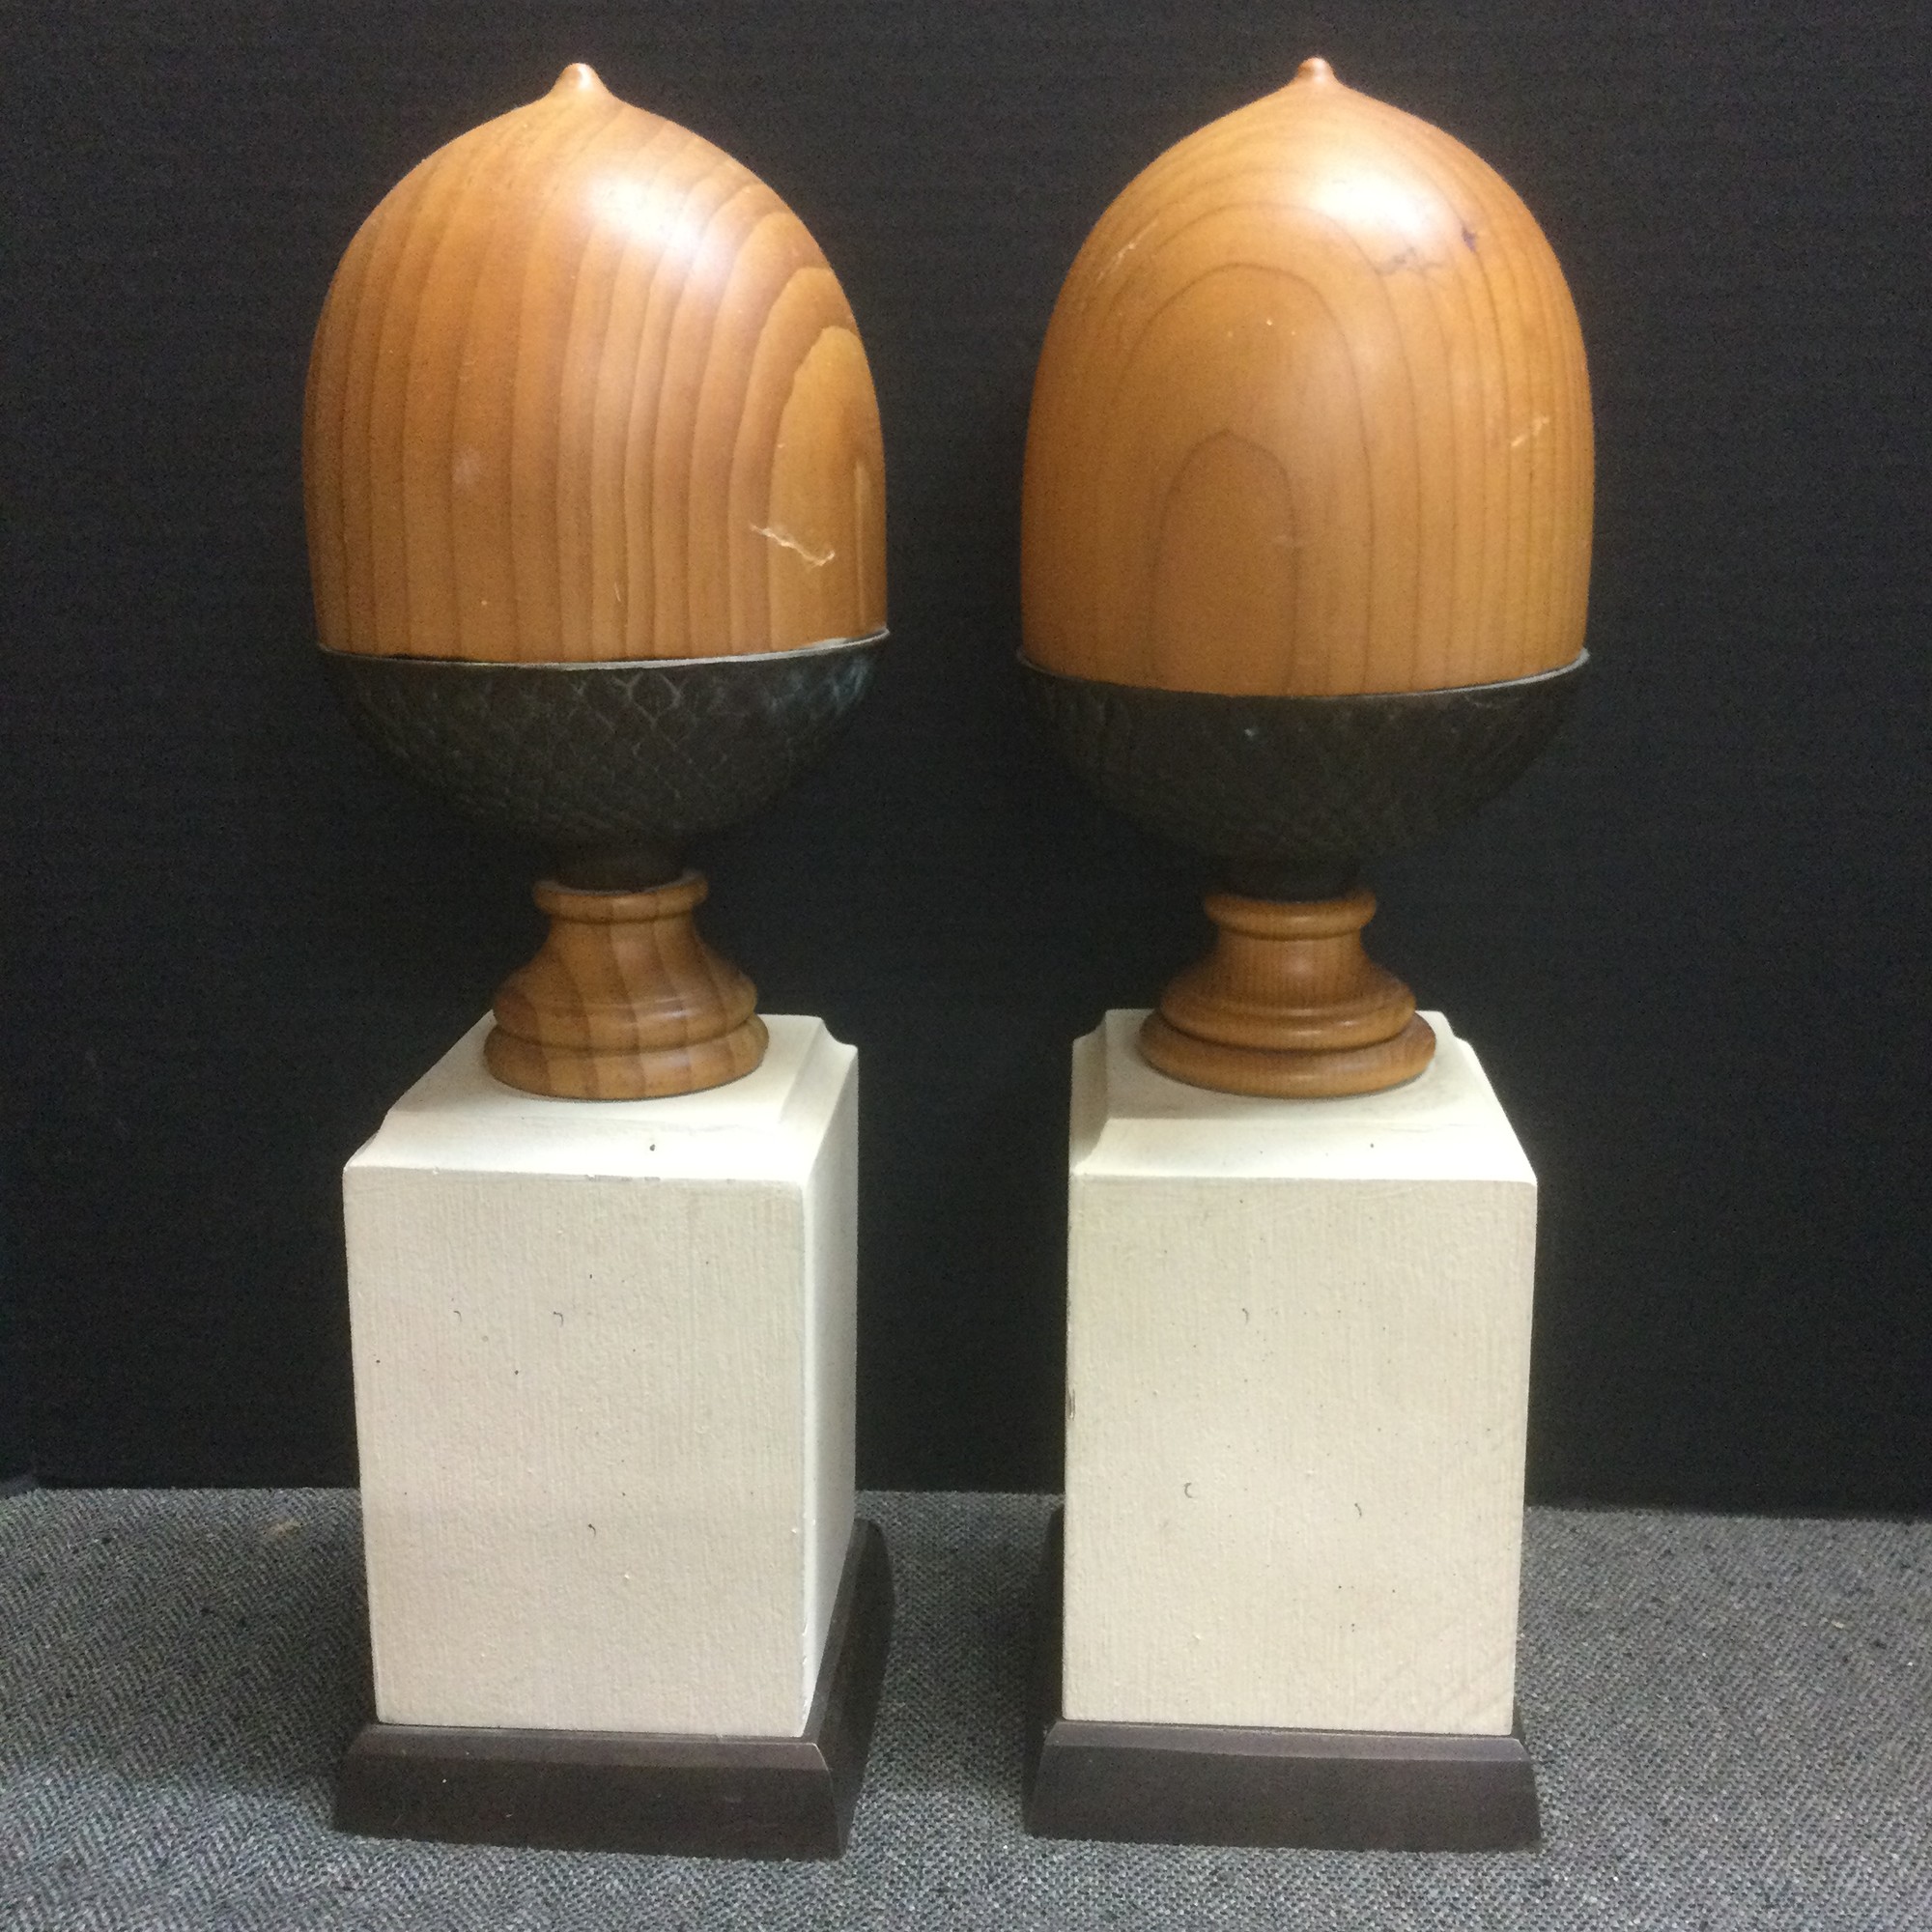 Carved acorn wood and brass finial sit a top their tall base. Propped on a shelf or mantle; this pair would stand out cradling a few of your favorite books. Lovely at 13 1/2h x 4w .